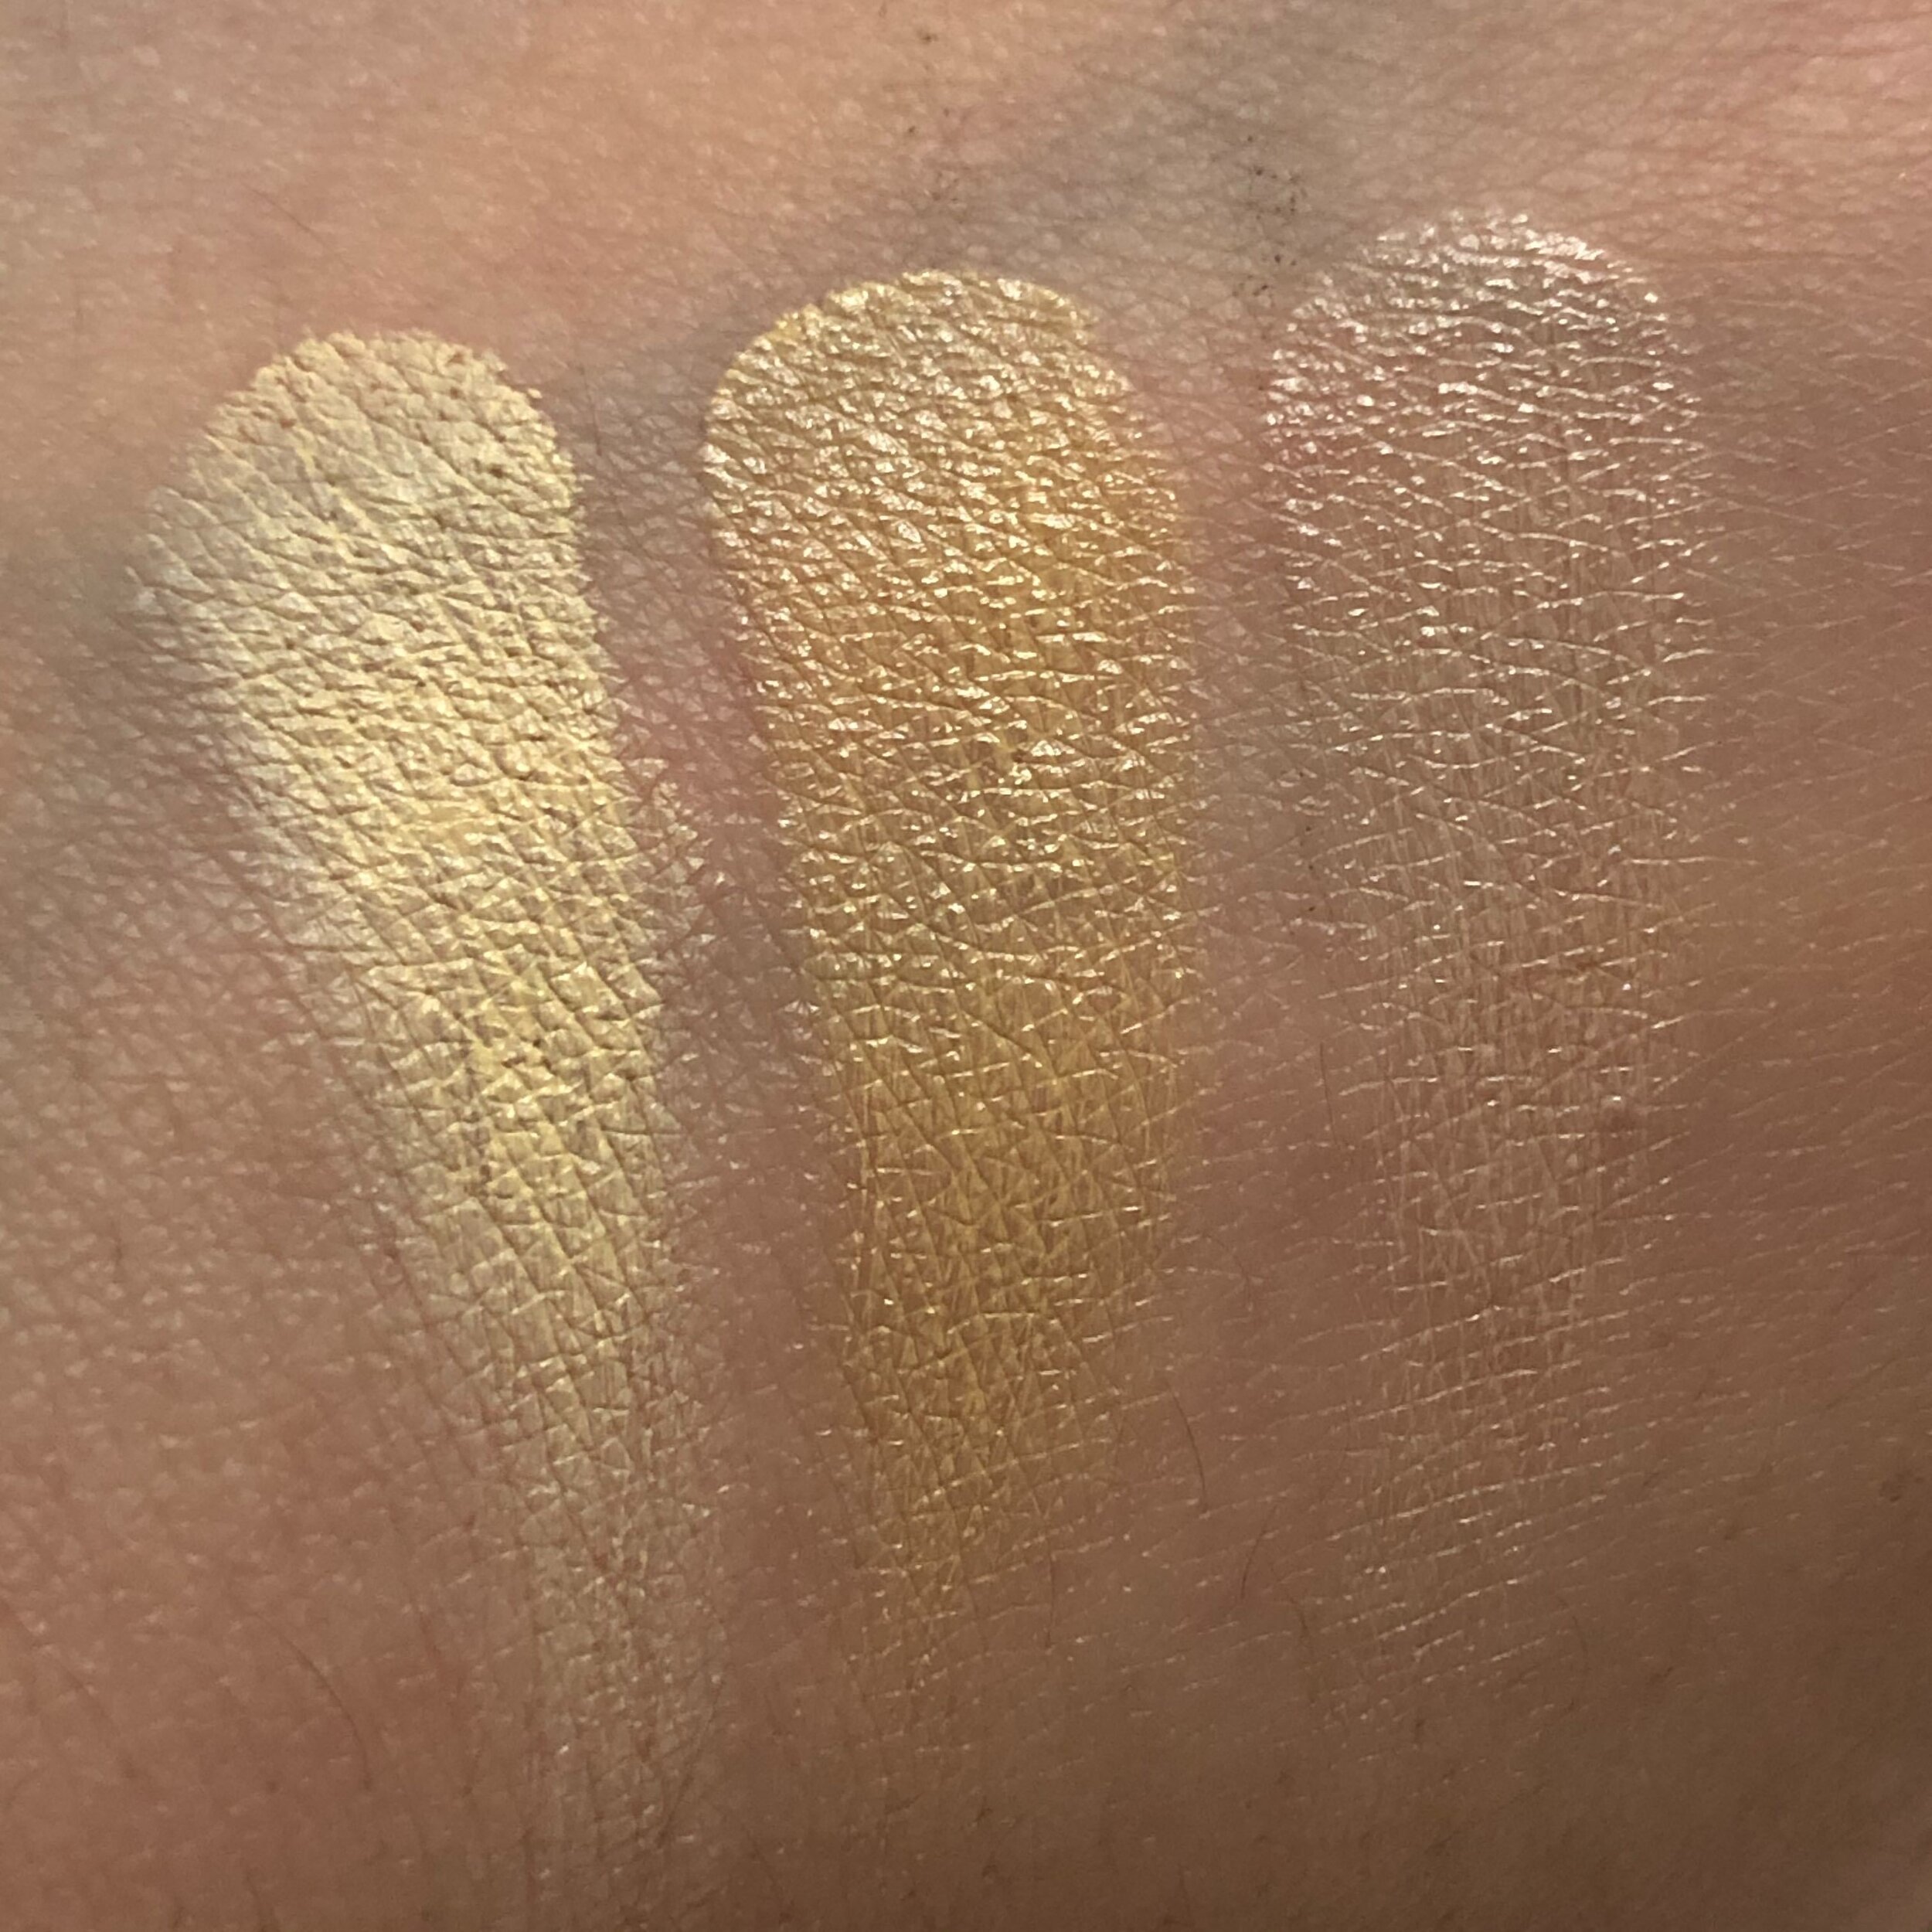 Lemon Aid on the left, Lily and Lolo comes with two shades, pictured on the right